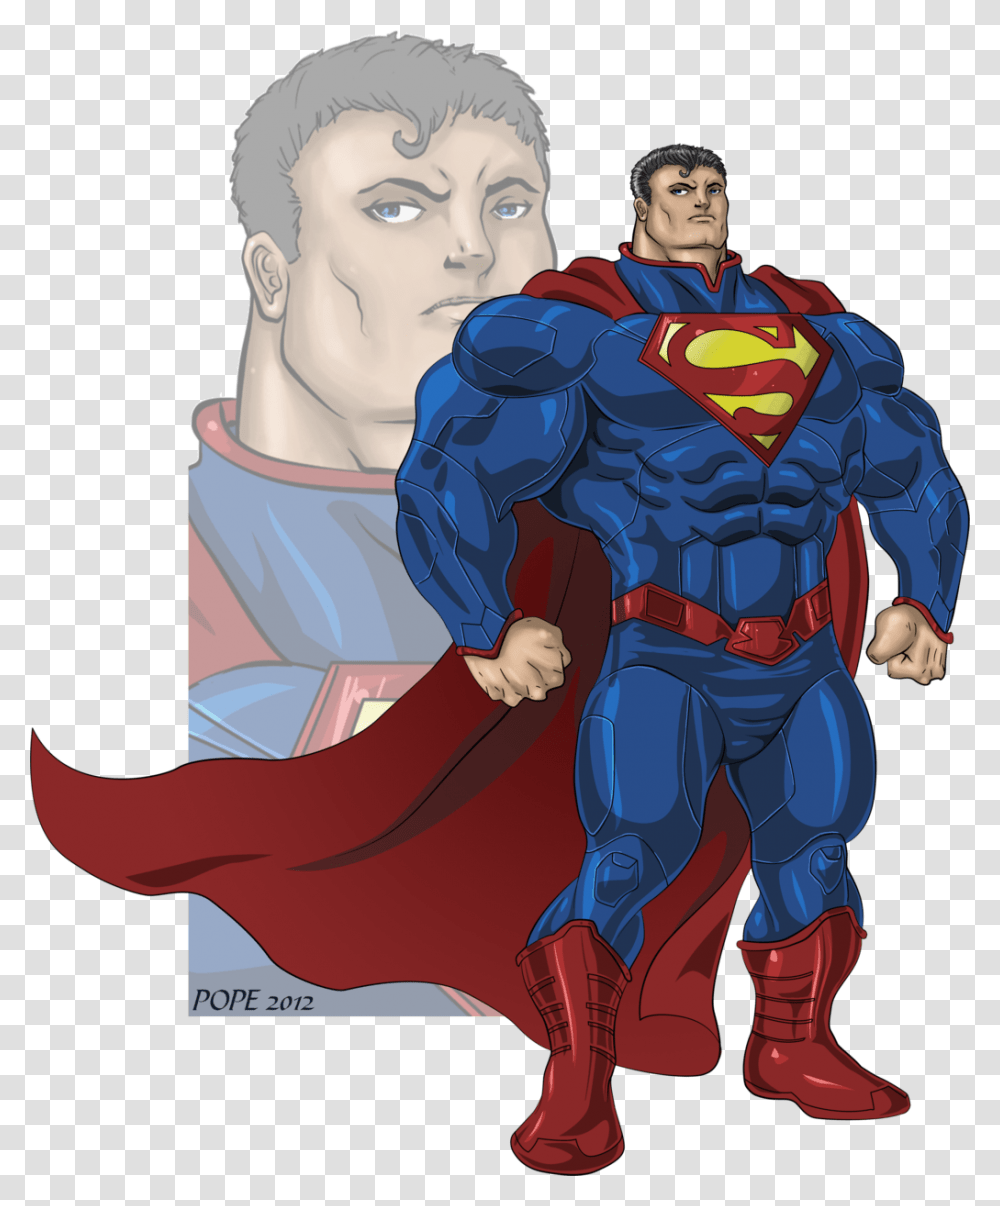 Superman Clipart Muscular Pencil And In Color Superman Muscle Superman ...